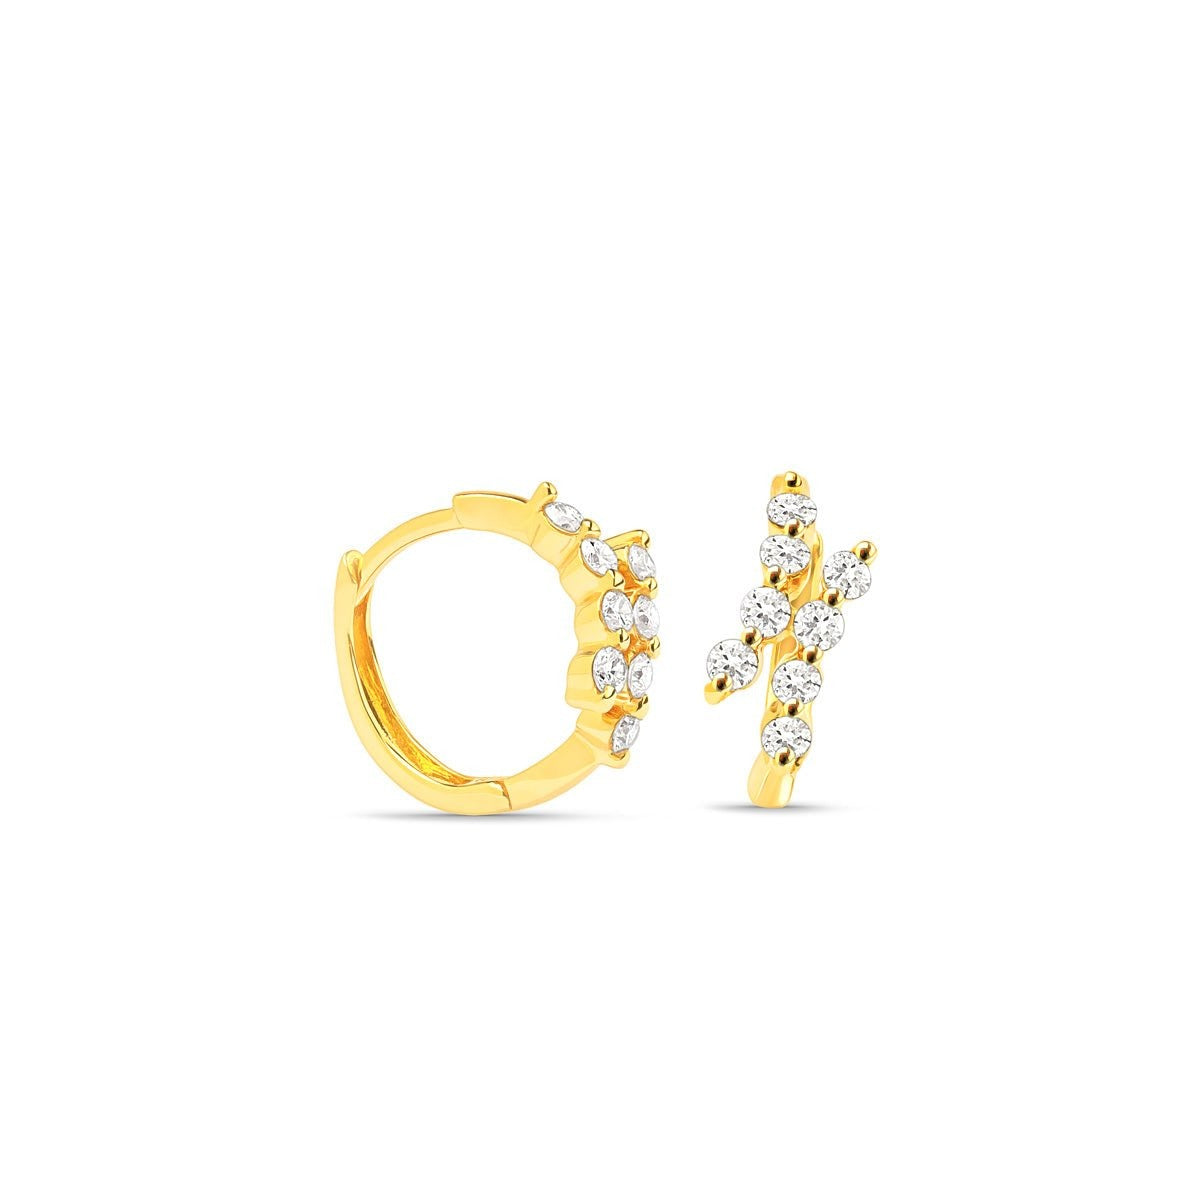 Diamond Double Curve Interlocking Huggie Earrings Earrings Estella Collection #product_description# 17337 14k Birthstone Birthstone Earrings #tag4# #tag5# #tag6# #tag7# #tag8# #tag9# #tag10#